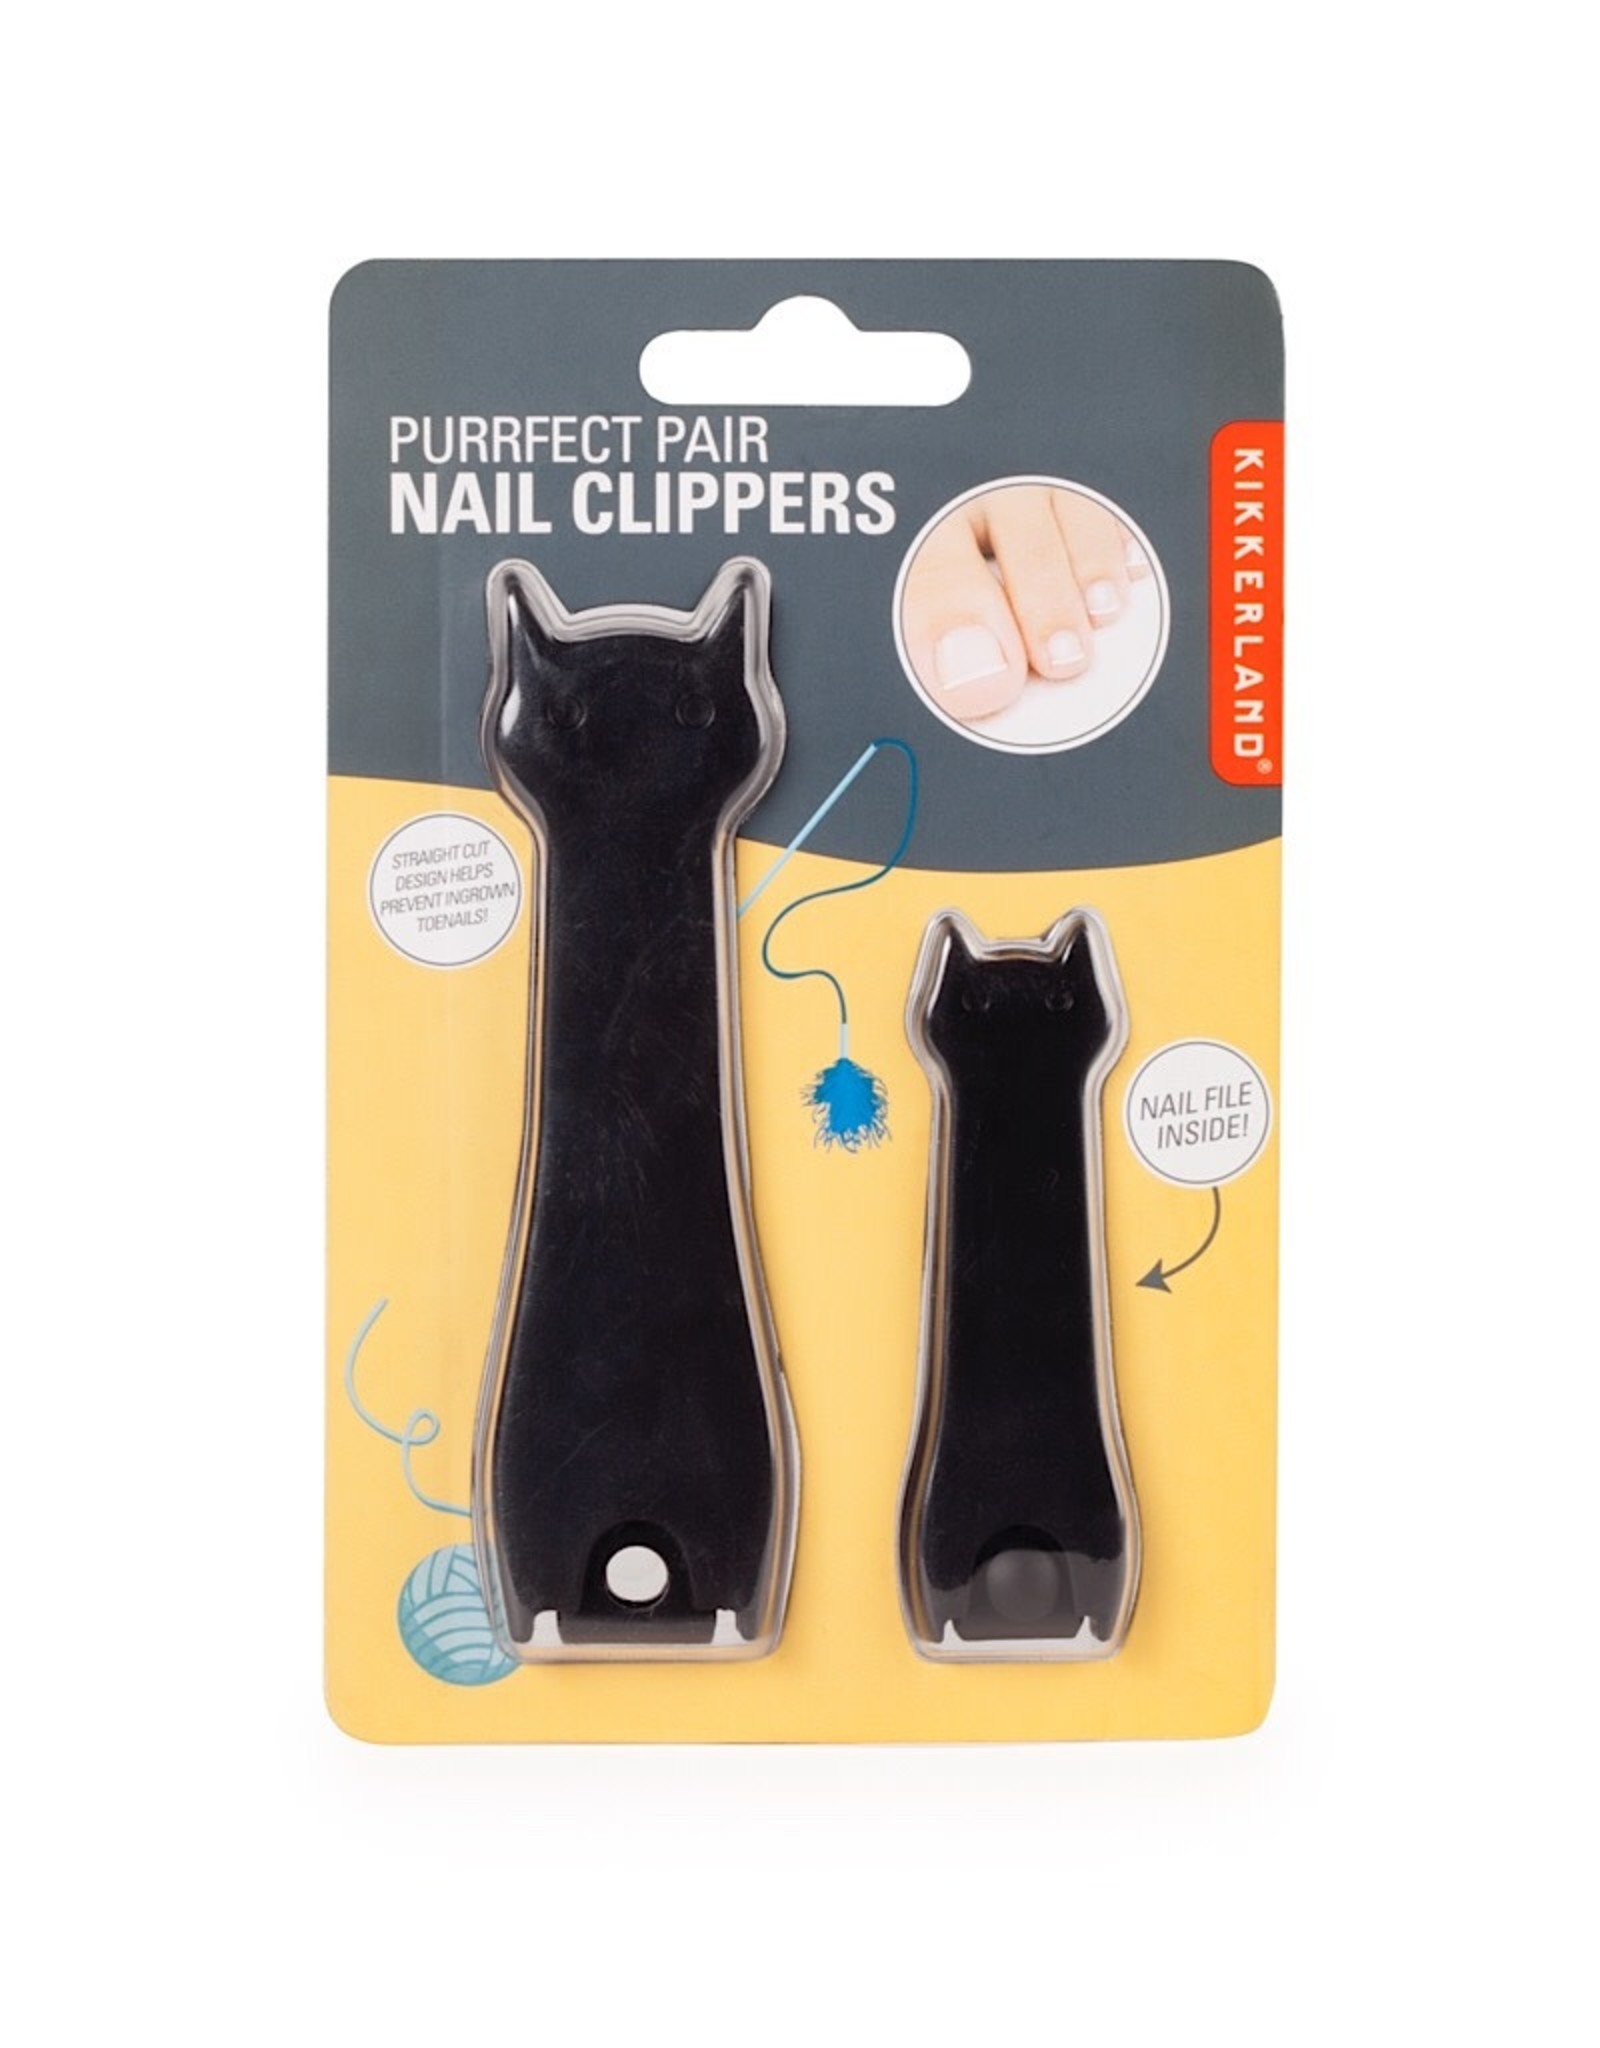 Kikkerland Purrfect Pair Nail Clippers